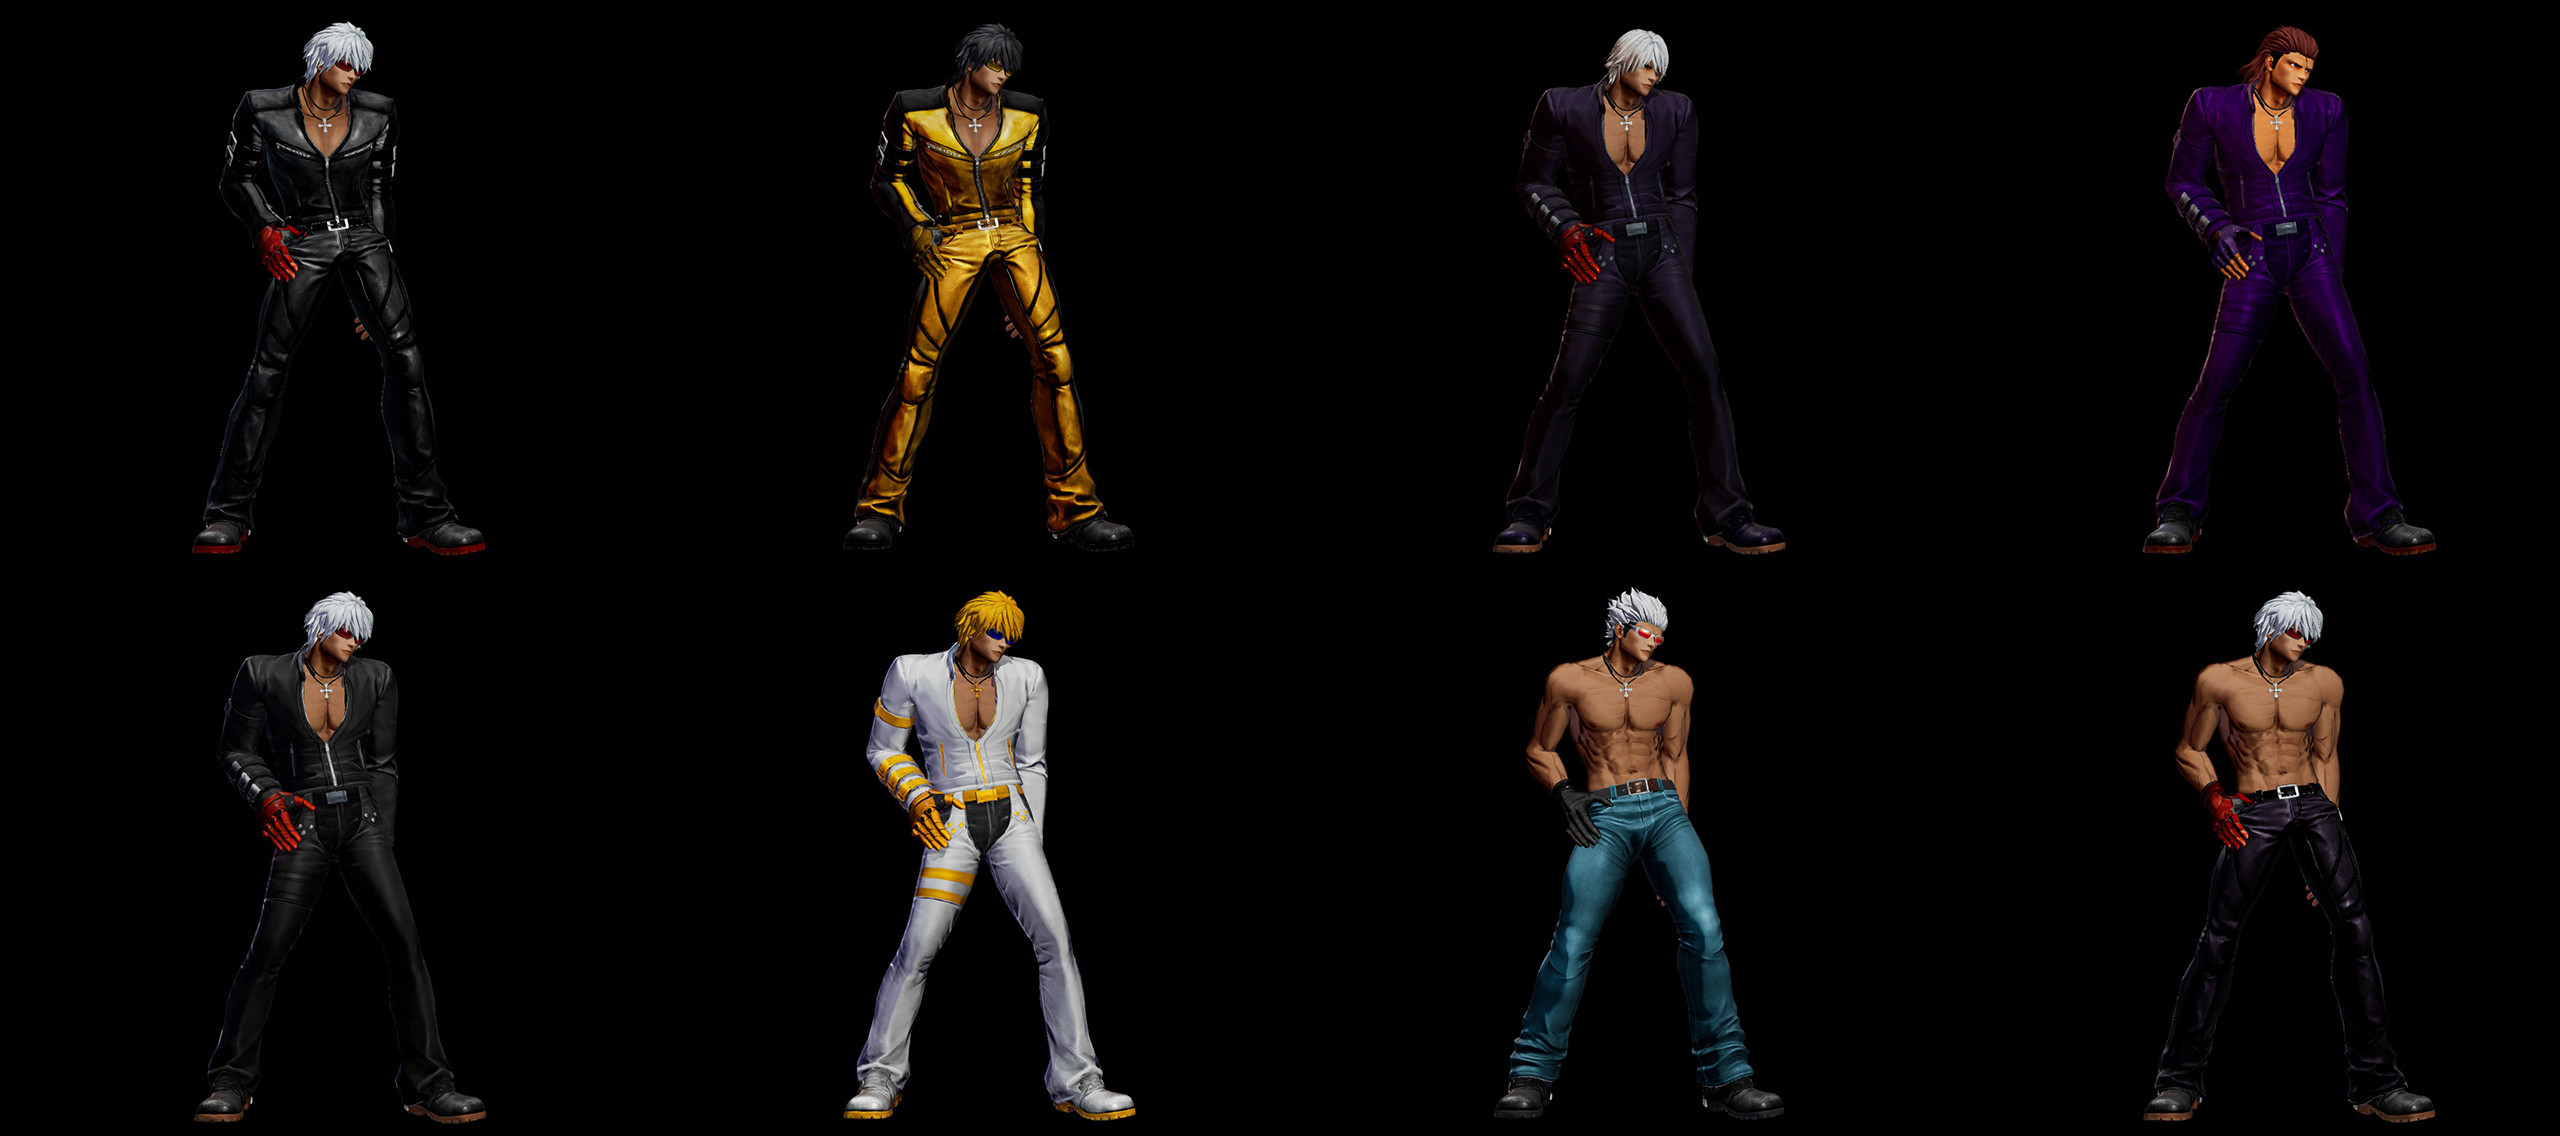 Fan-Favorite K' Lights up the Stage in The King of Fighters XV